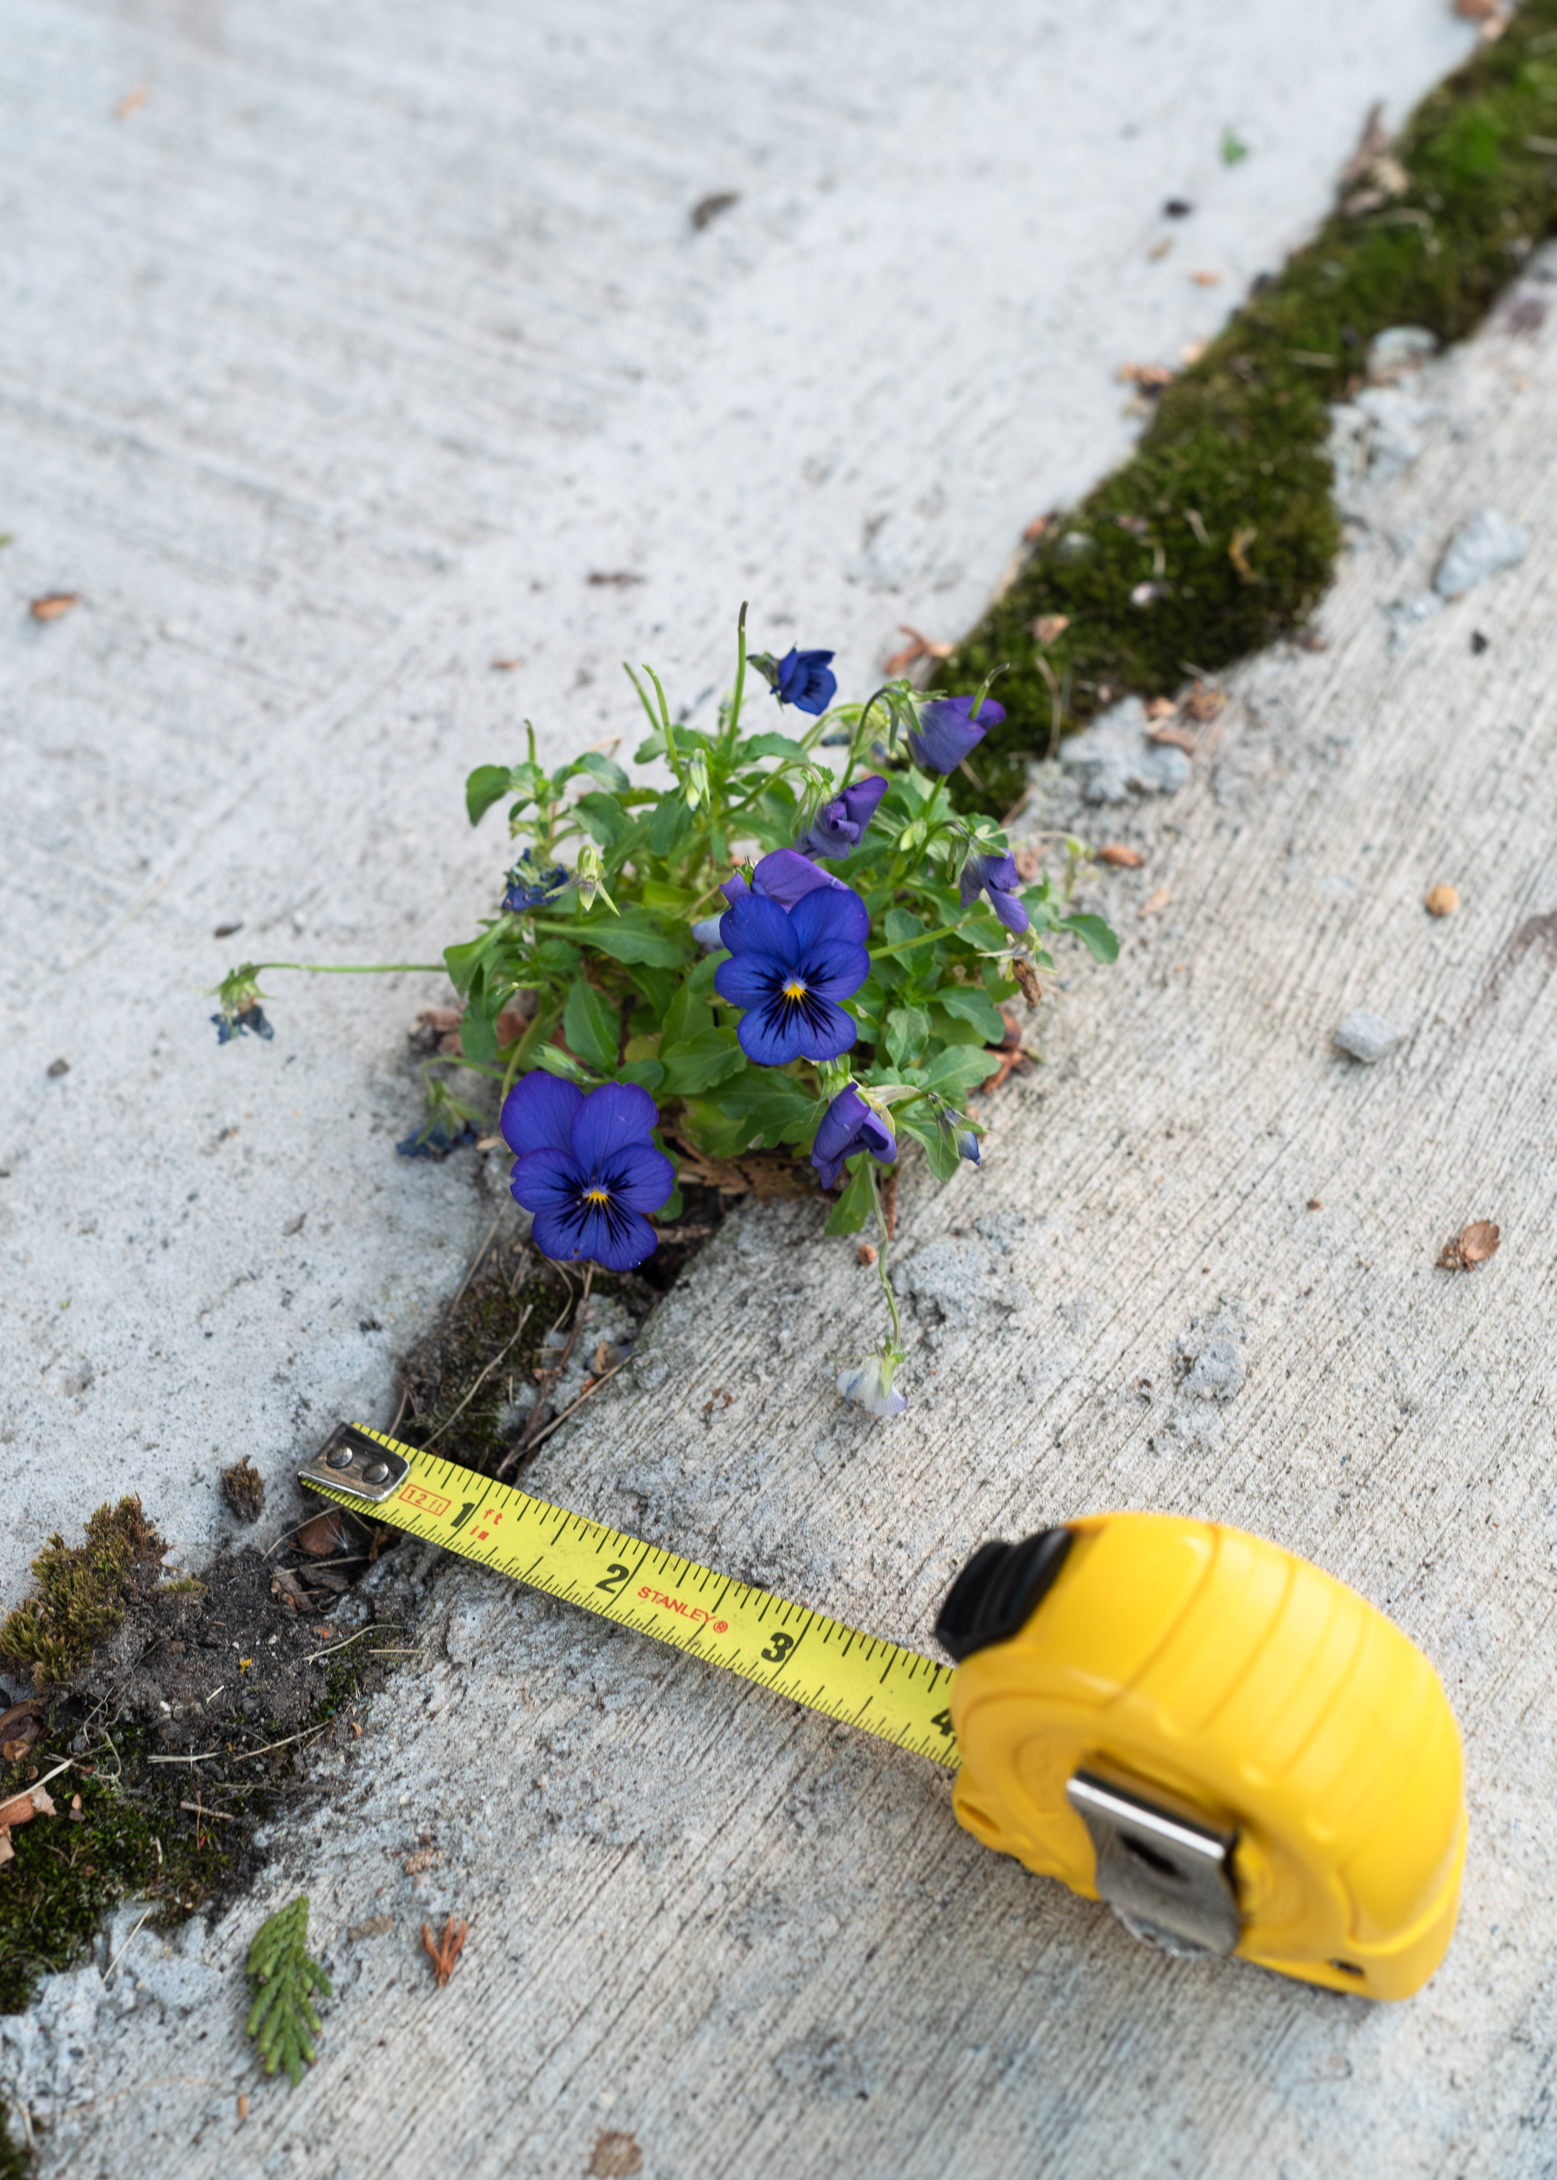 Analyzing  the growing conditions of a pansy found growing in a sidewalk on Brockville Ave, Guelph